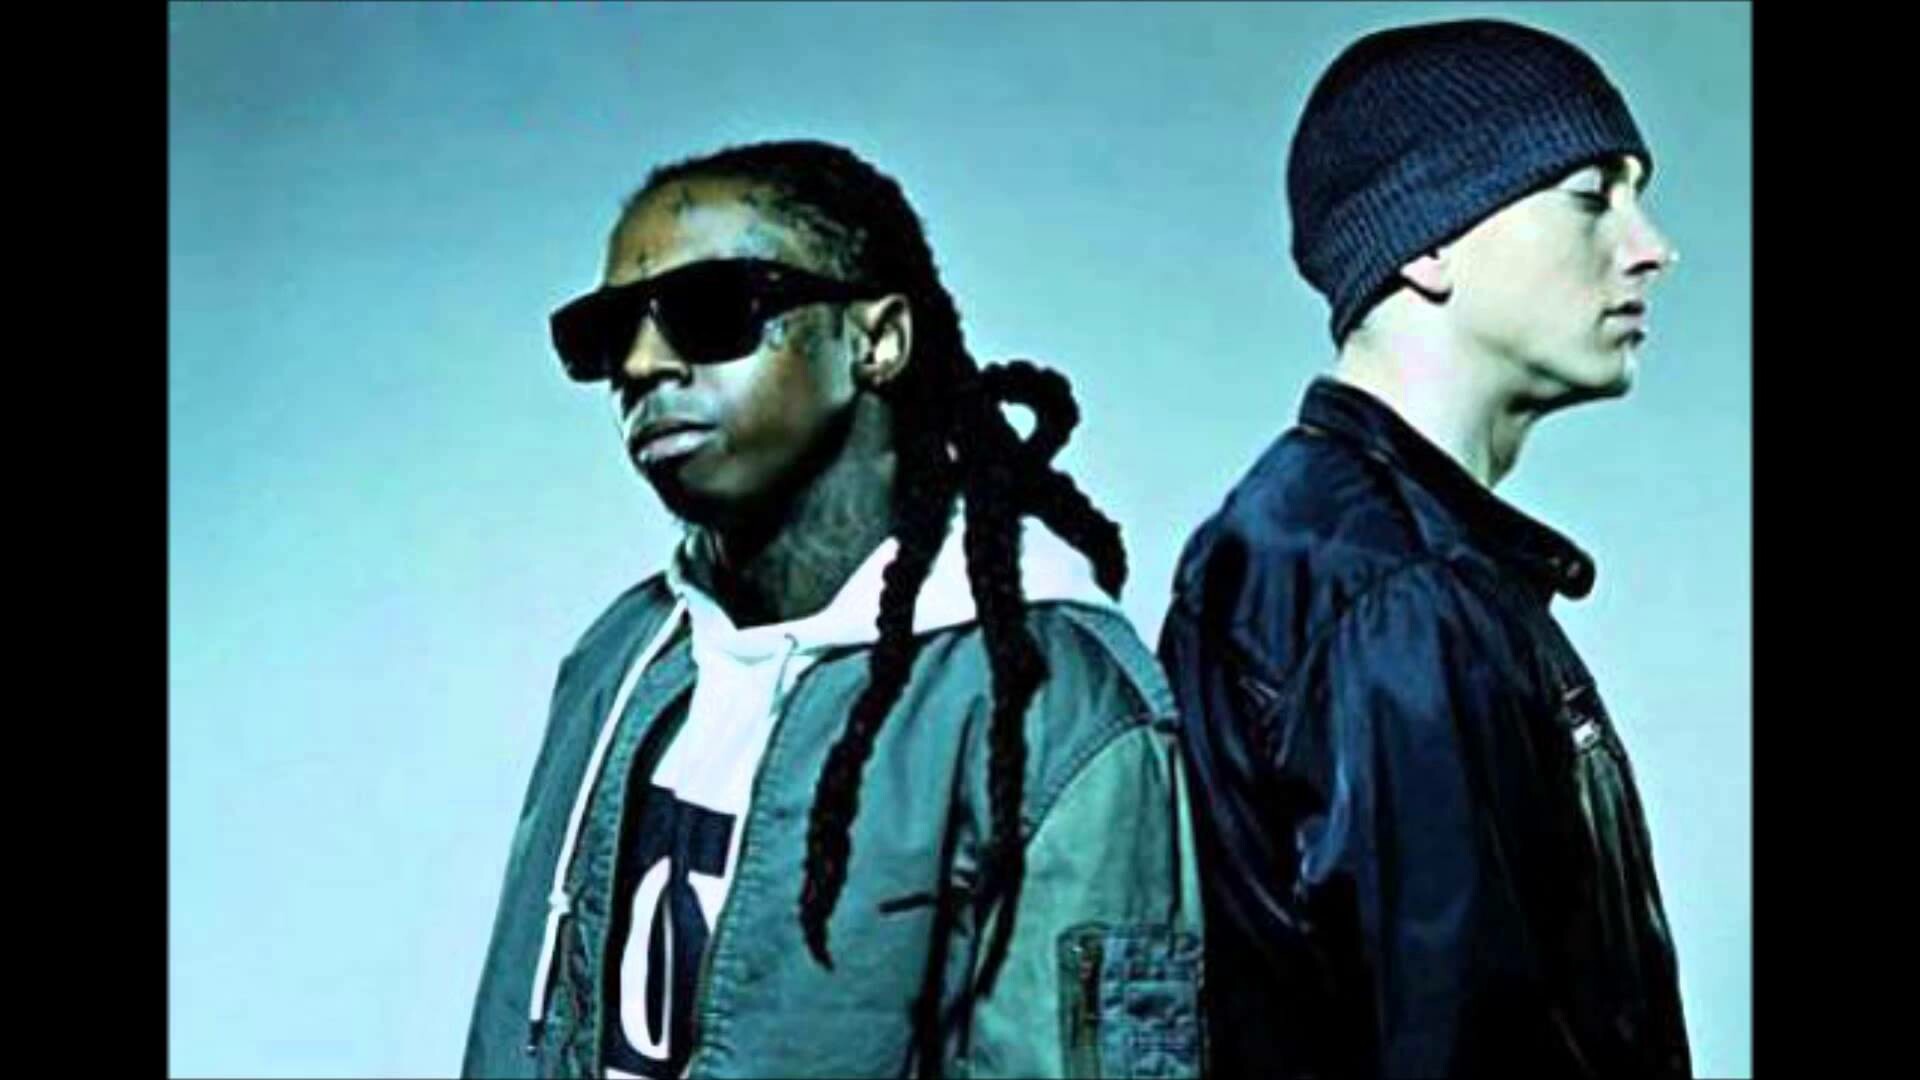 59+ Eminem and Lil Wayne Wallpapers: HD, 4K, 5K for PC and Mobile |  Download free images for iPhone, Android